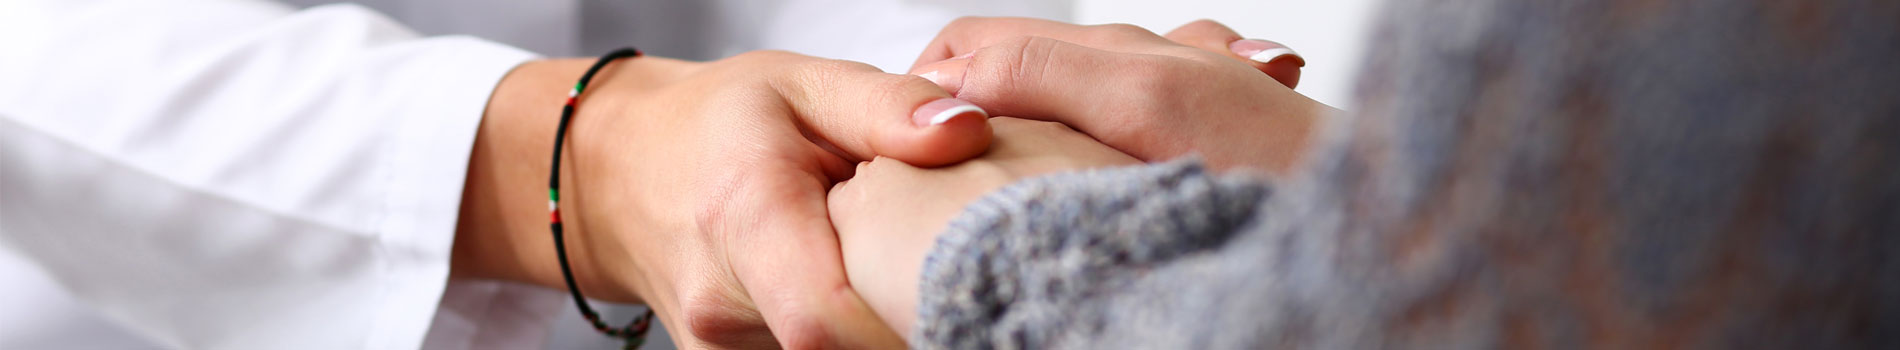 A provider holds the hands of a patient